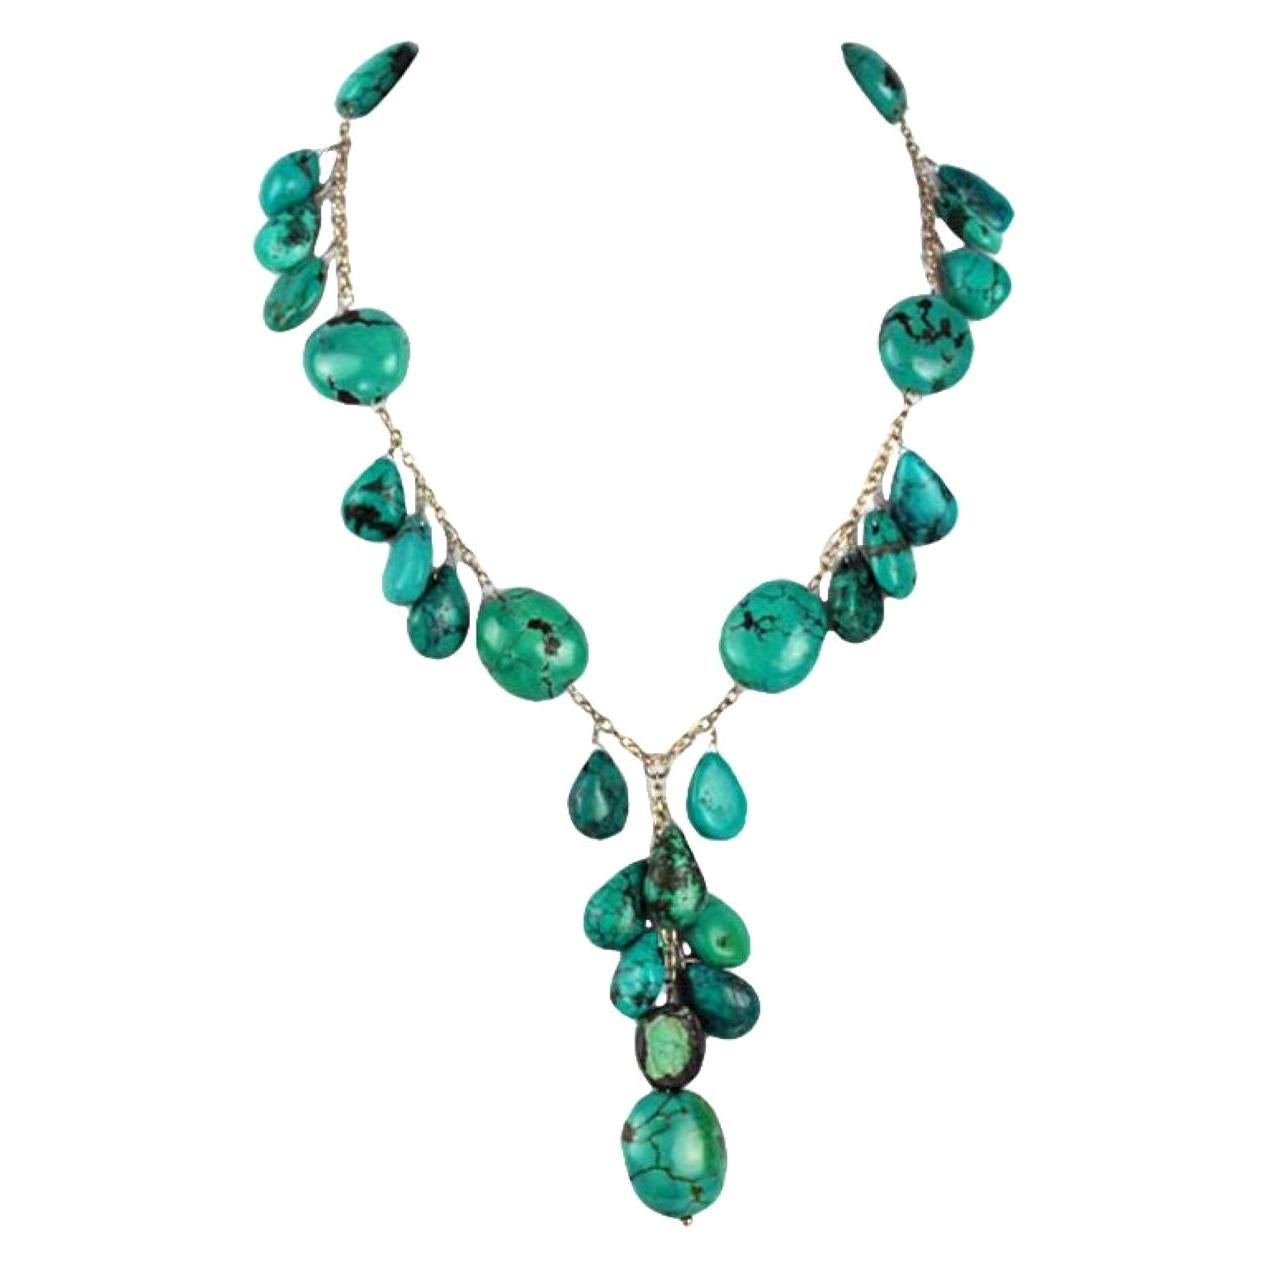 Beautiful Genuine Turquoise and Sterling Silver ‘Y’ Necklace